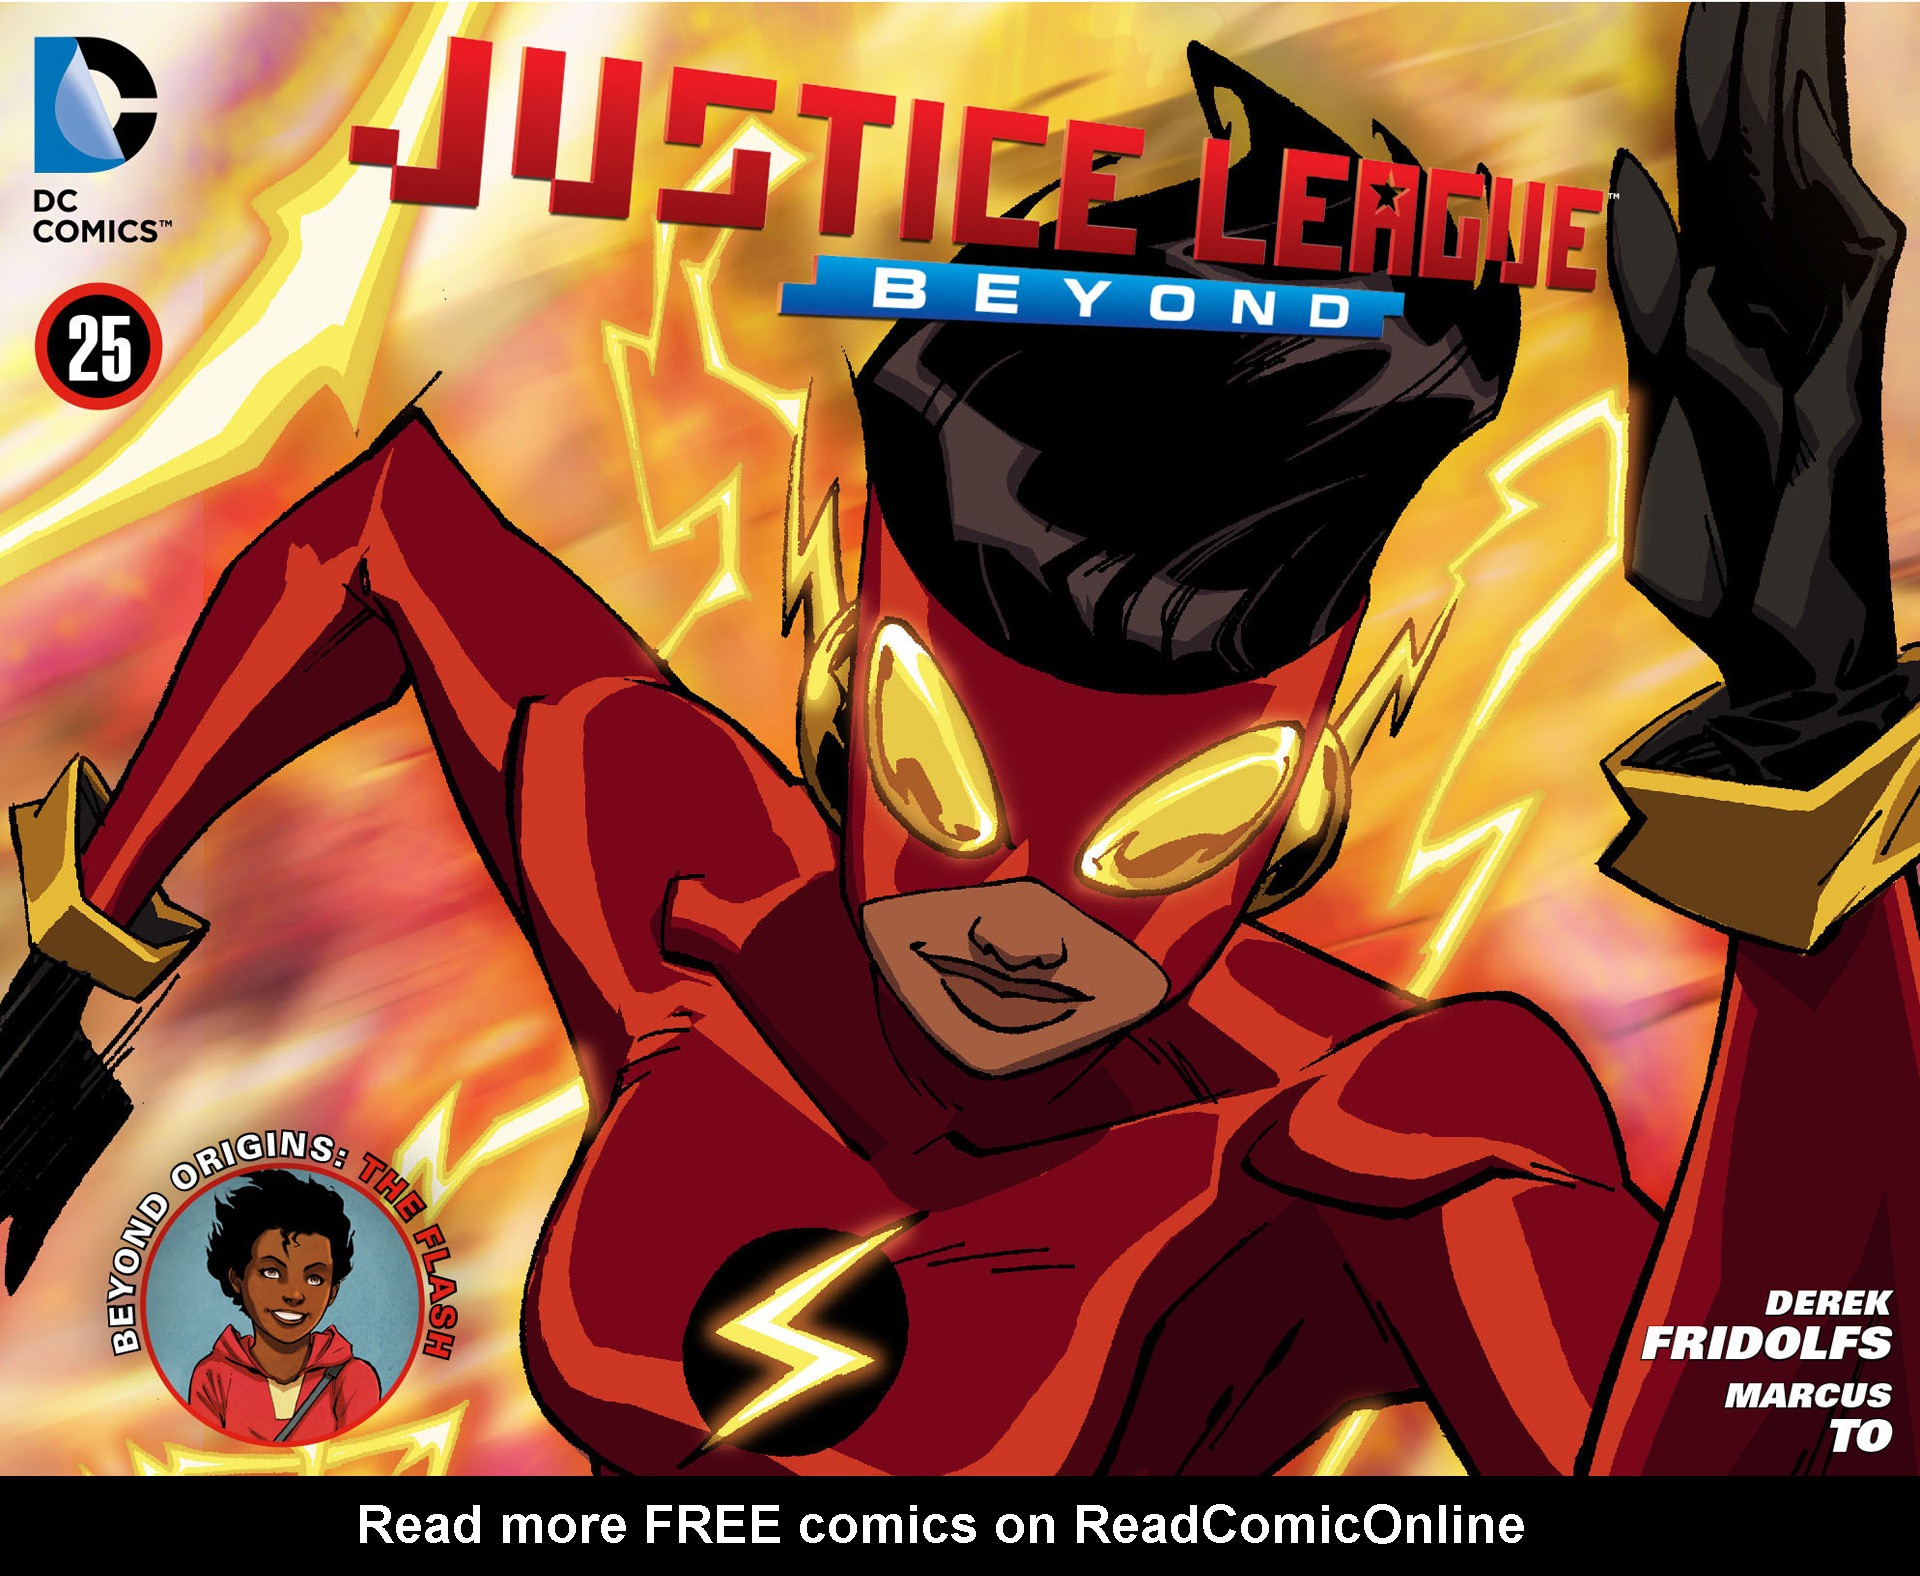 Read online Justice League Beyond comic -  Issue #25 - 1